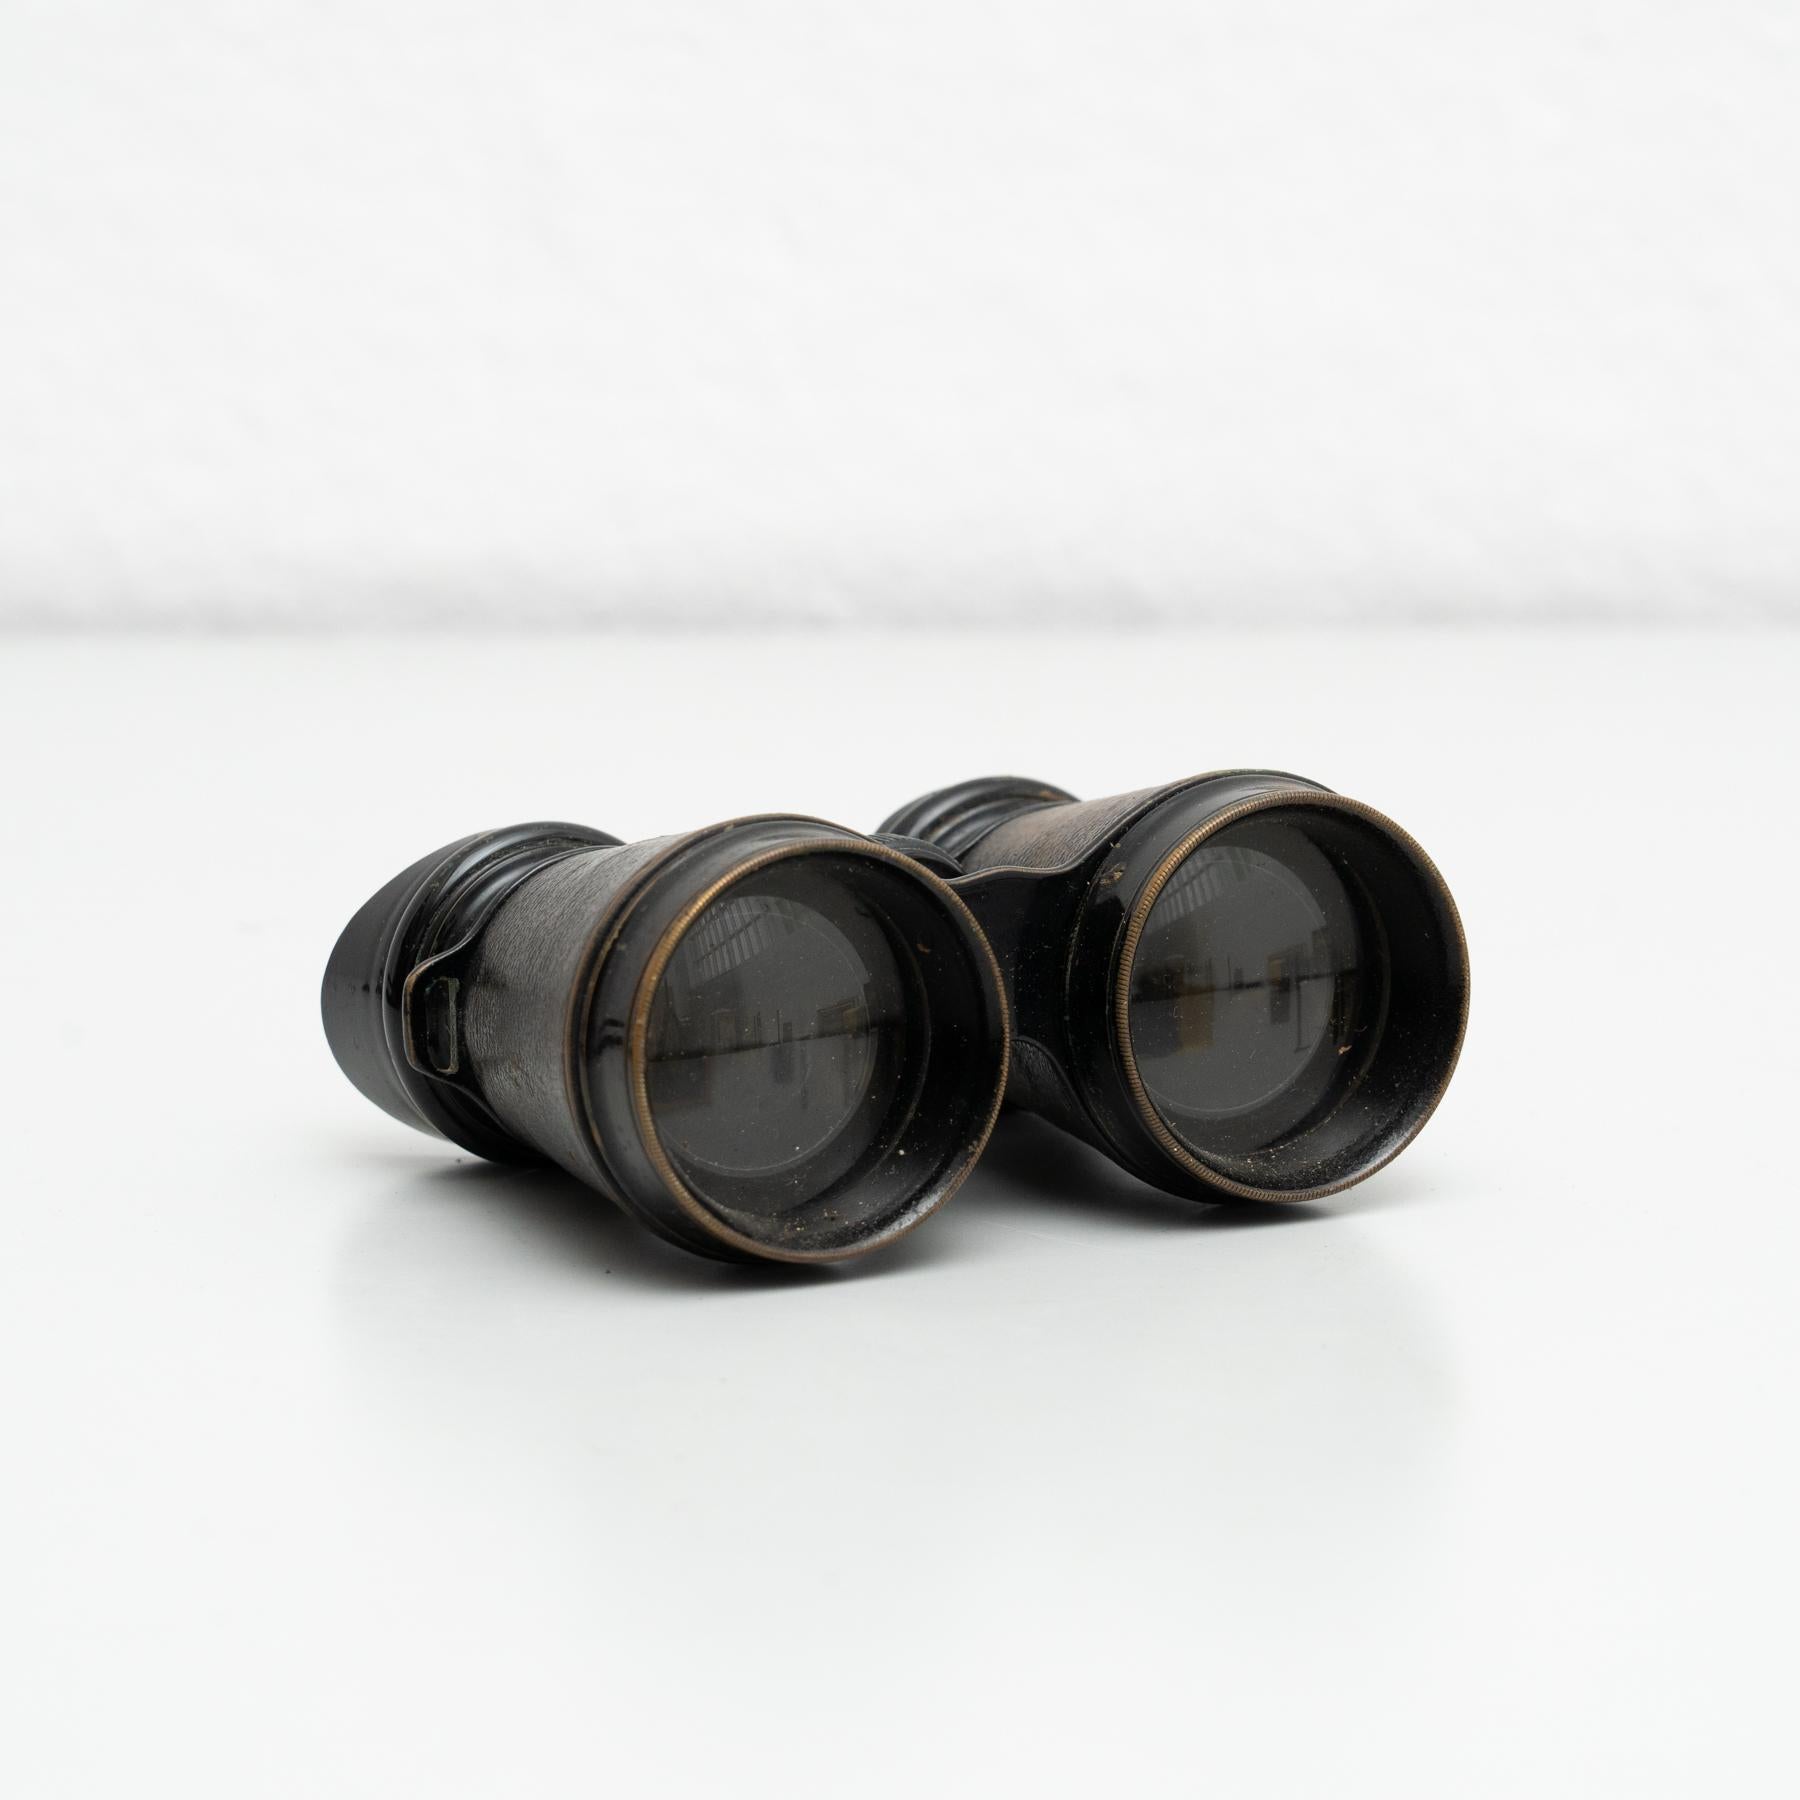 Mid-20th Century Antique Vintage Binoculars on a Leather Case, circa 1950 For Sale